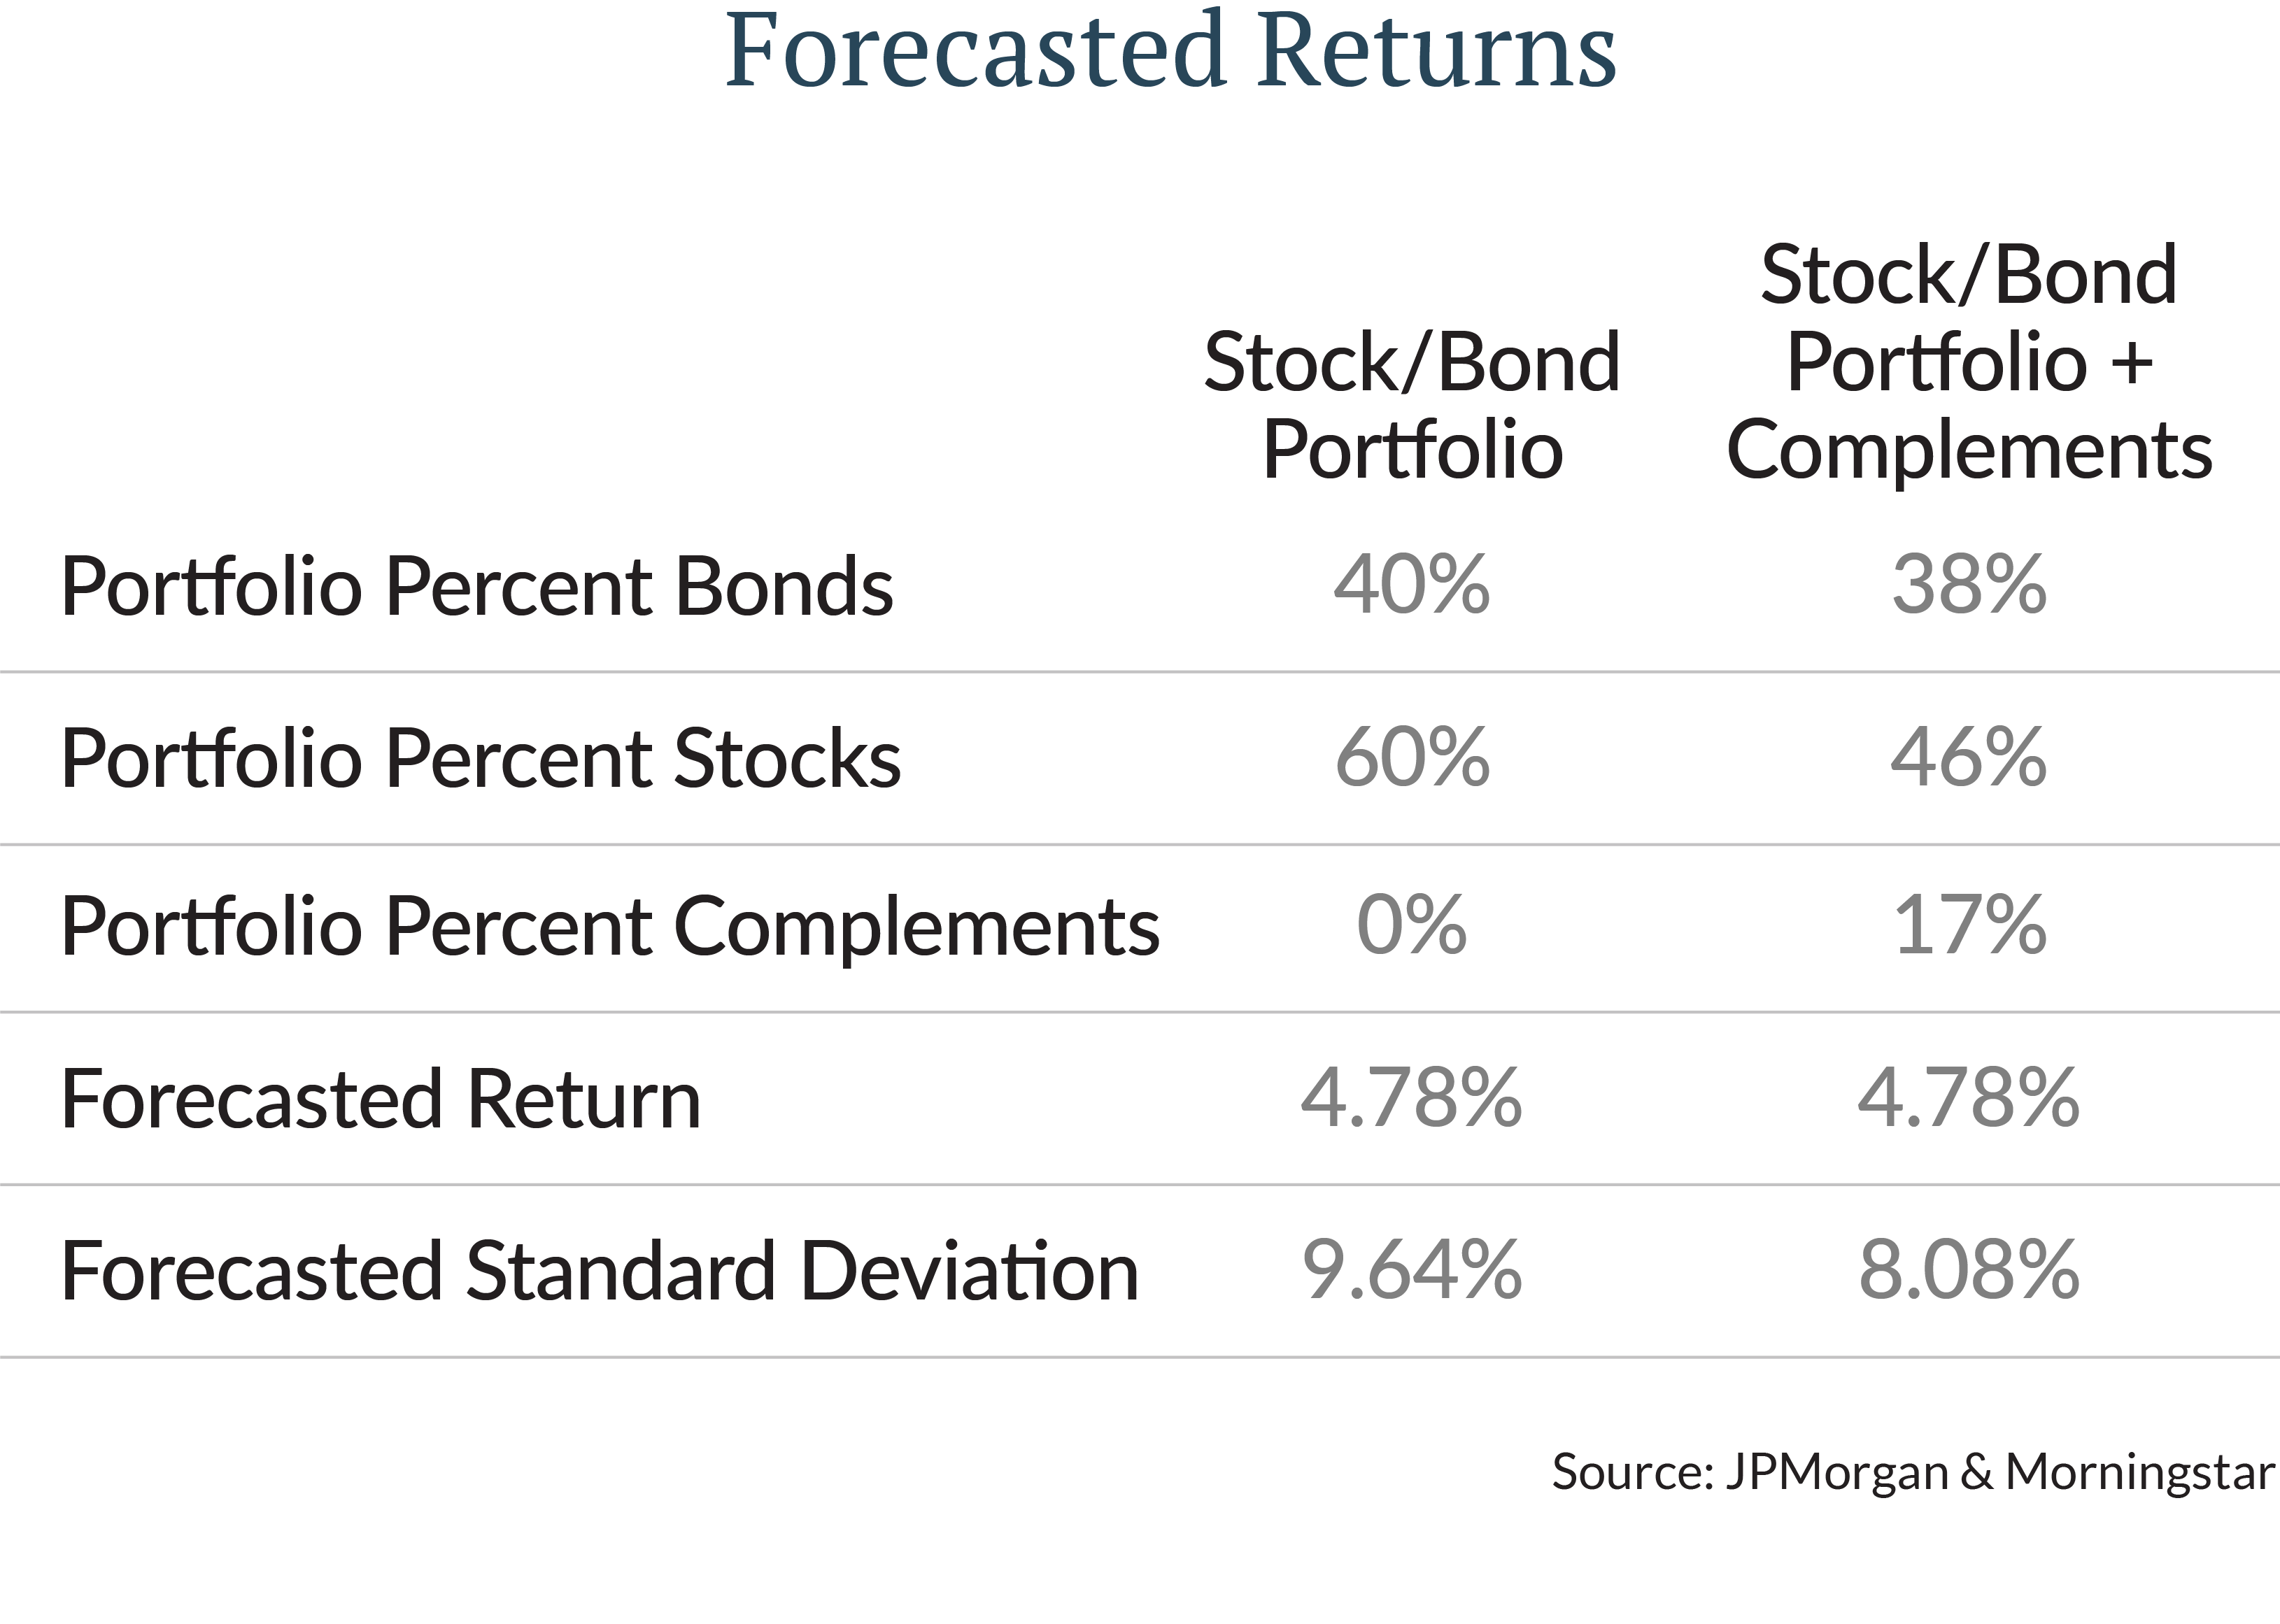 the graph compares the simulated portfolio outcomes of the two portfolios based on their respective levels of risk and return and assuming a starting value of $1.5M. The simulation also assumes annual withdrawals of $60,000, based upon the classic 4% retirement rule